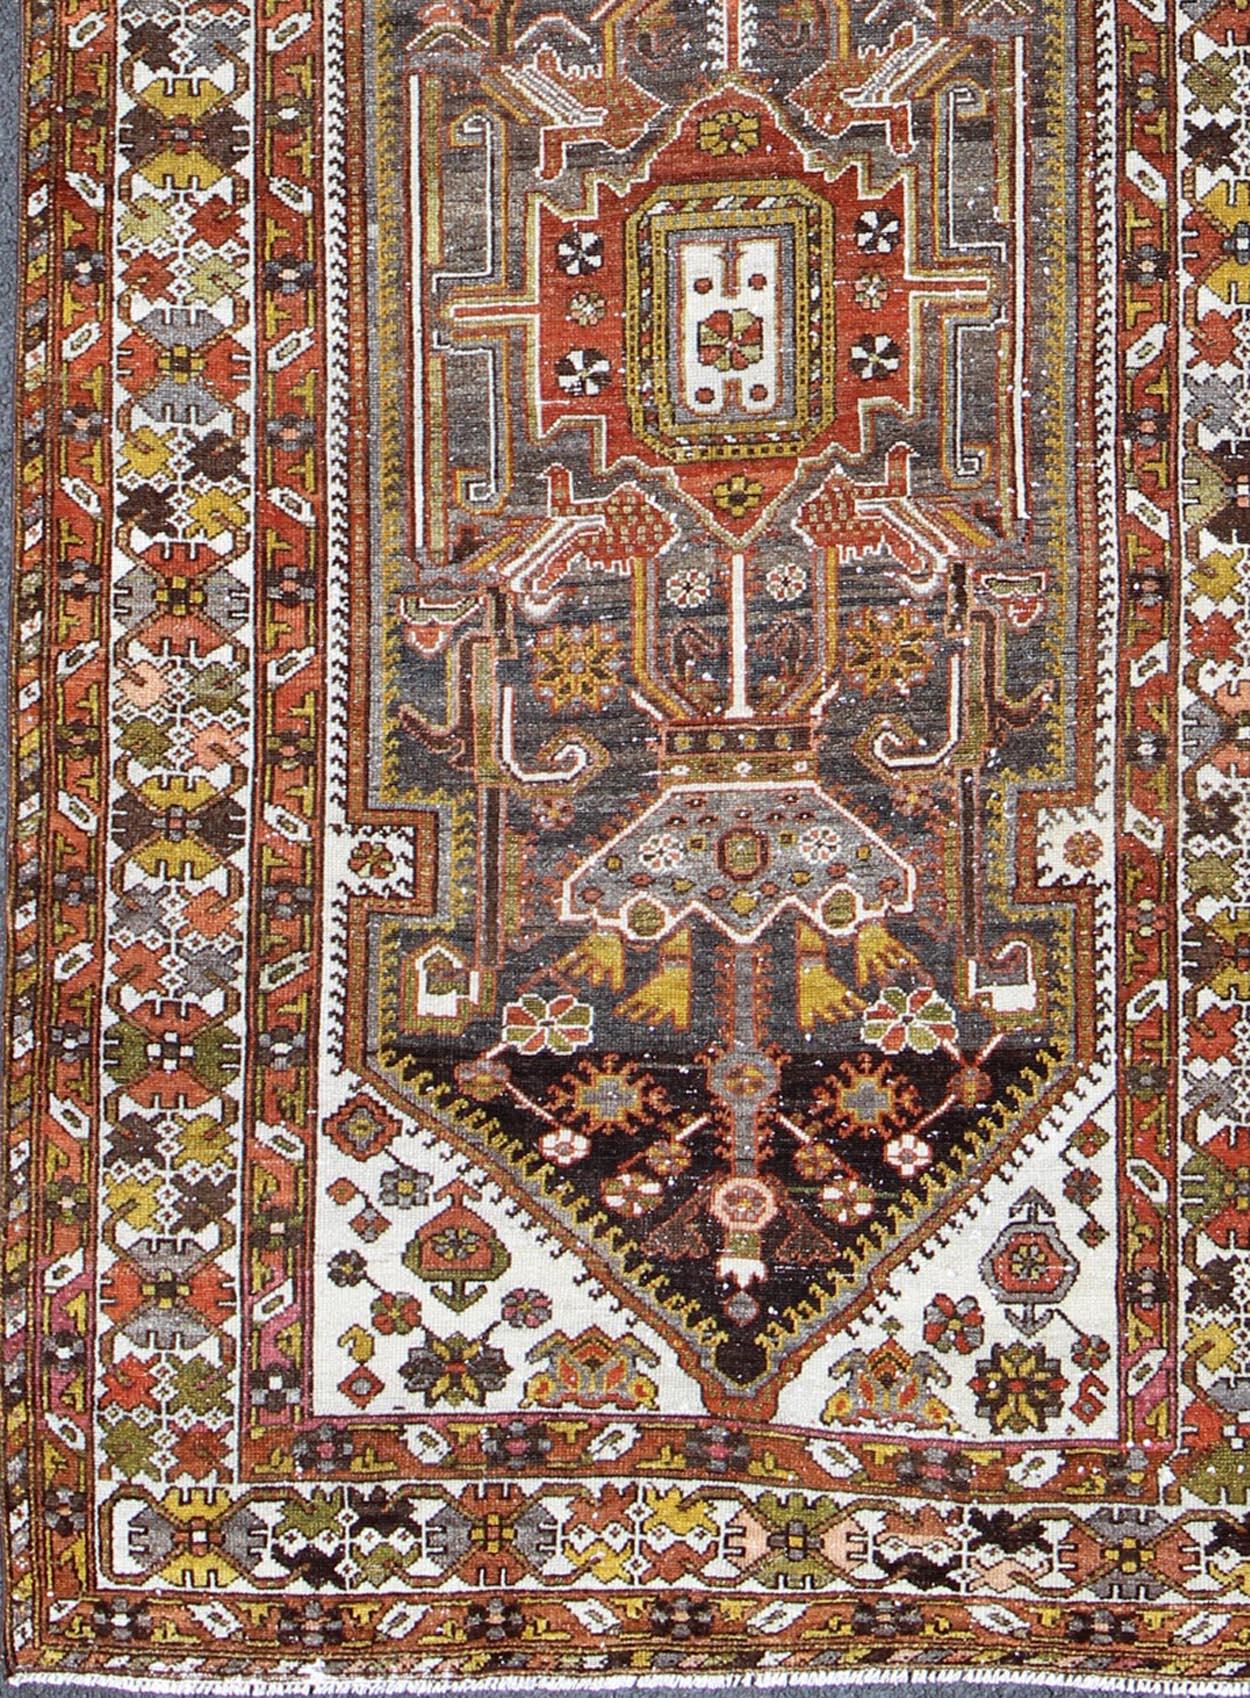 Geometric Medallion Design Vintage Persian Bakhtiari Runner in Orange, Olive, Brown, Ivory, and Gray, rug gng-4753, country of origin / type: Iran / Bakhtiari, circa 1930

Persian Bakhtiari rugs are in fact tribal pieces that rely upon a